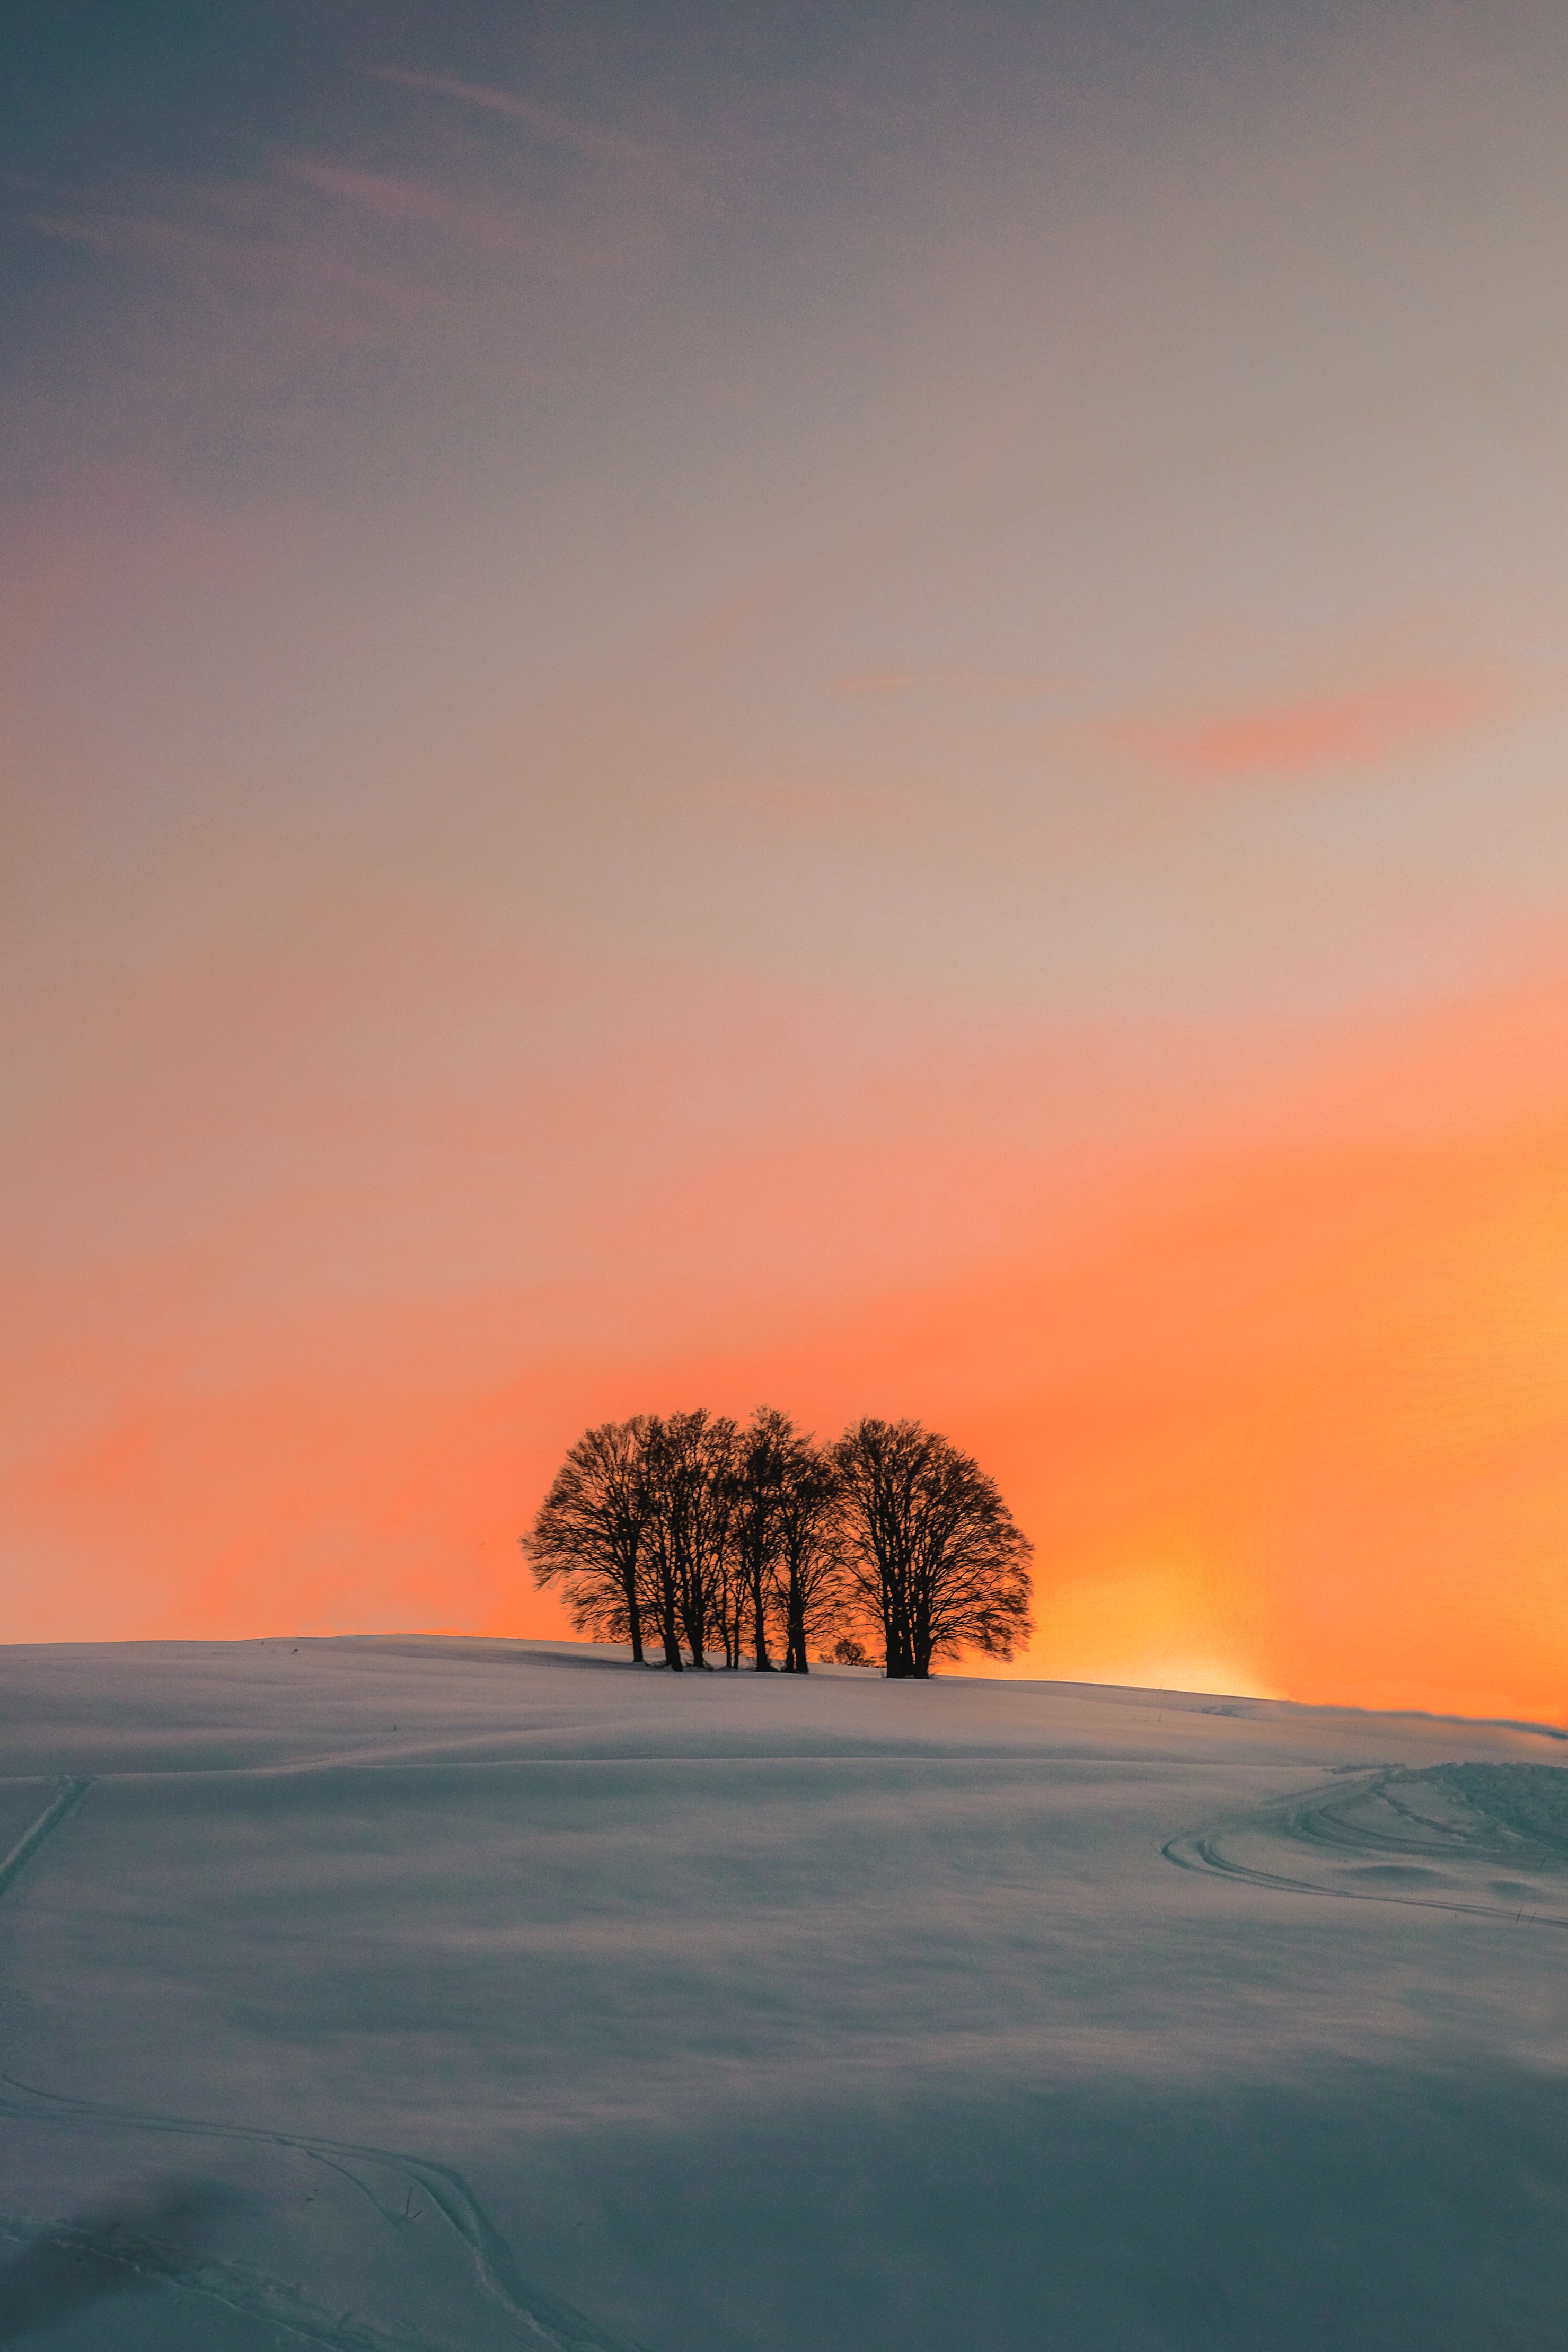 117076 download wallpaper winter, nature, trees, sunset, snow, field screensavers and pictures for free